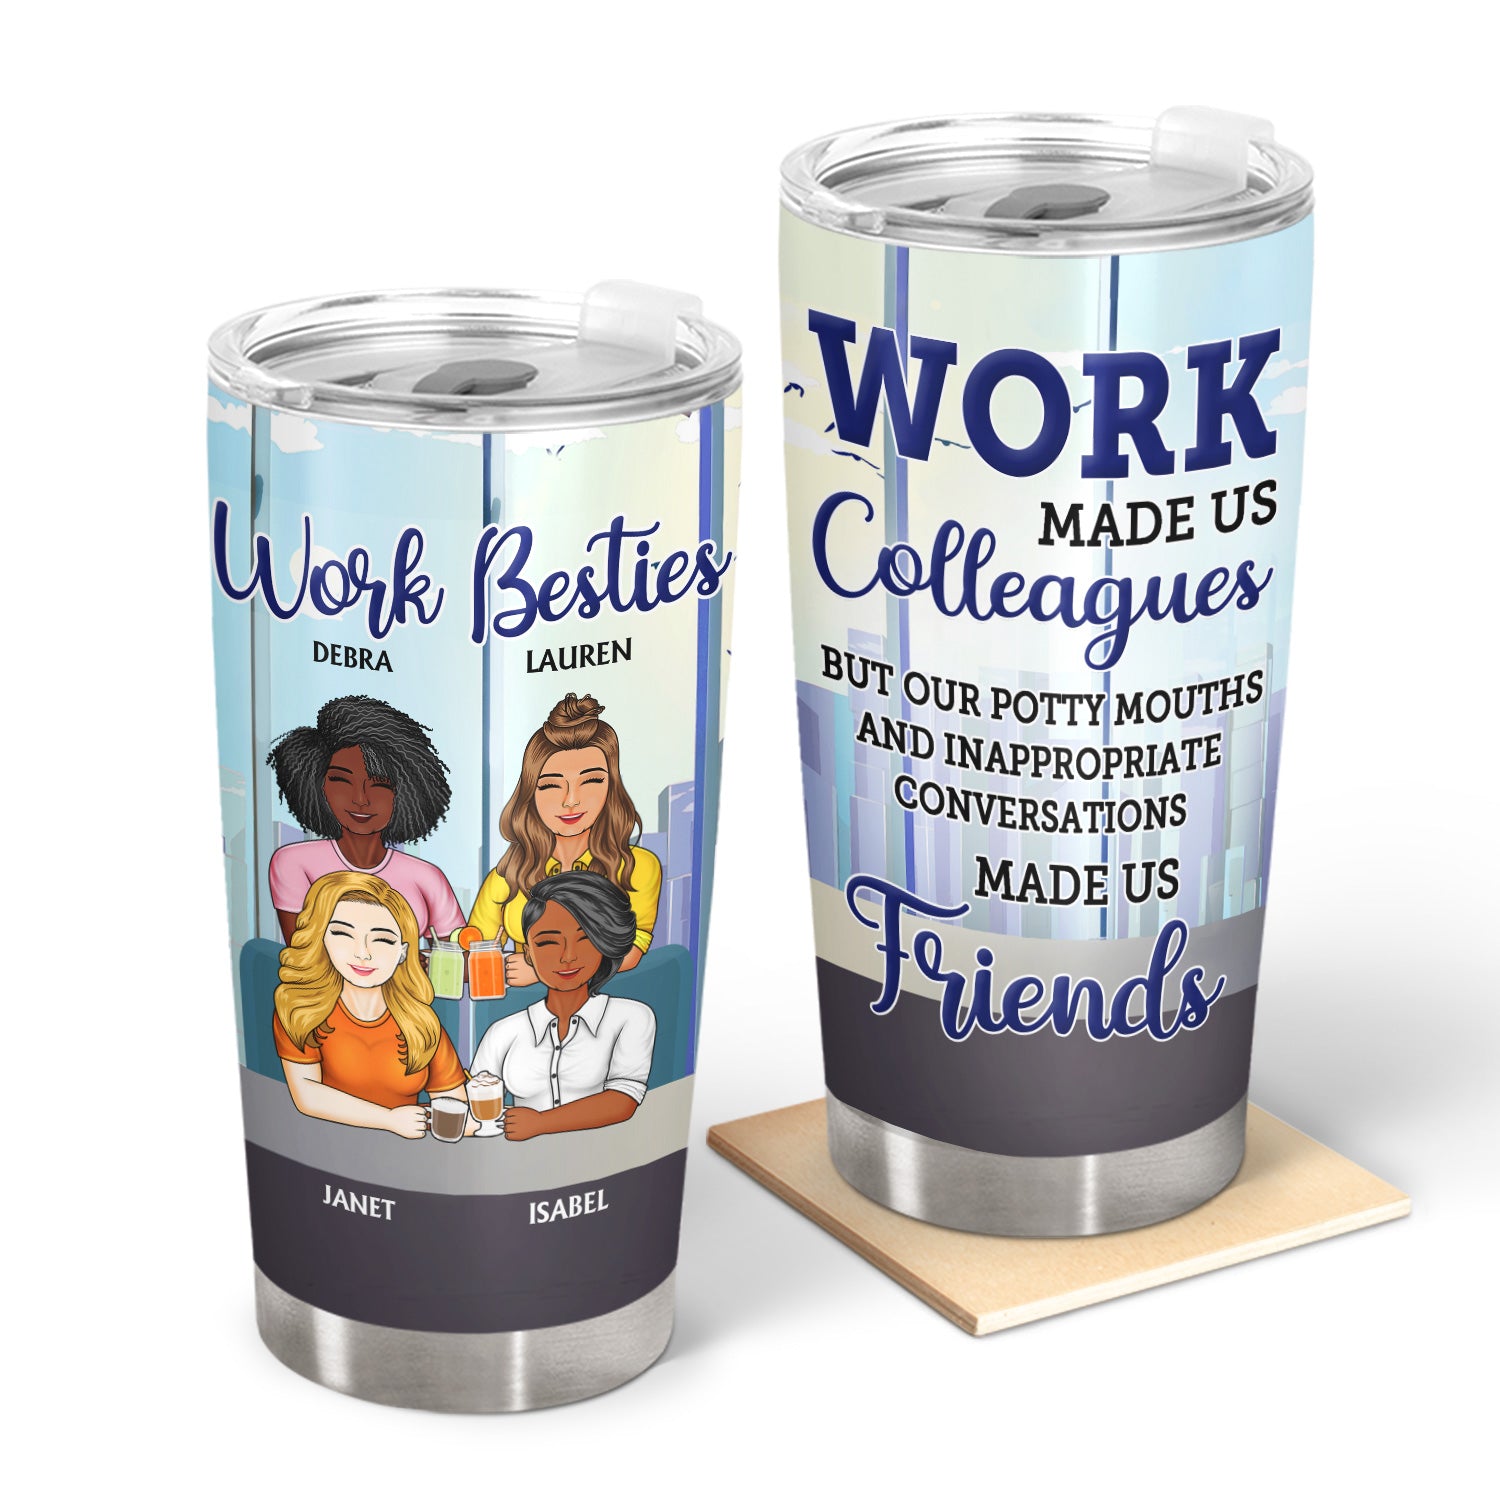 Work Made Us Co-workers But Our Potty Mouths - Funny, Anniversary, Birthday Gifts For Colleagues, Coworkers, Besties - Personalized Custom Tumbler